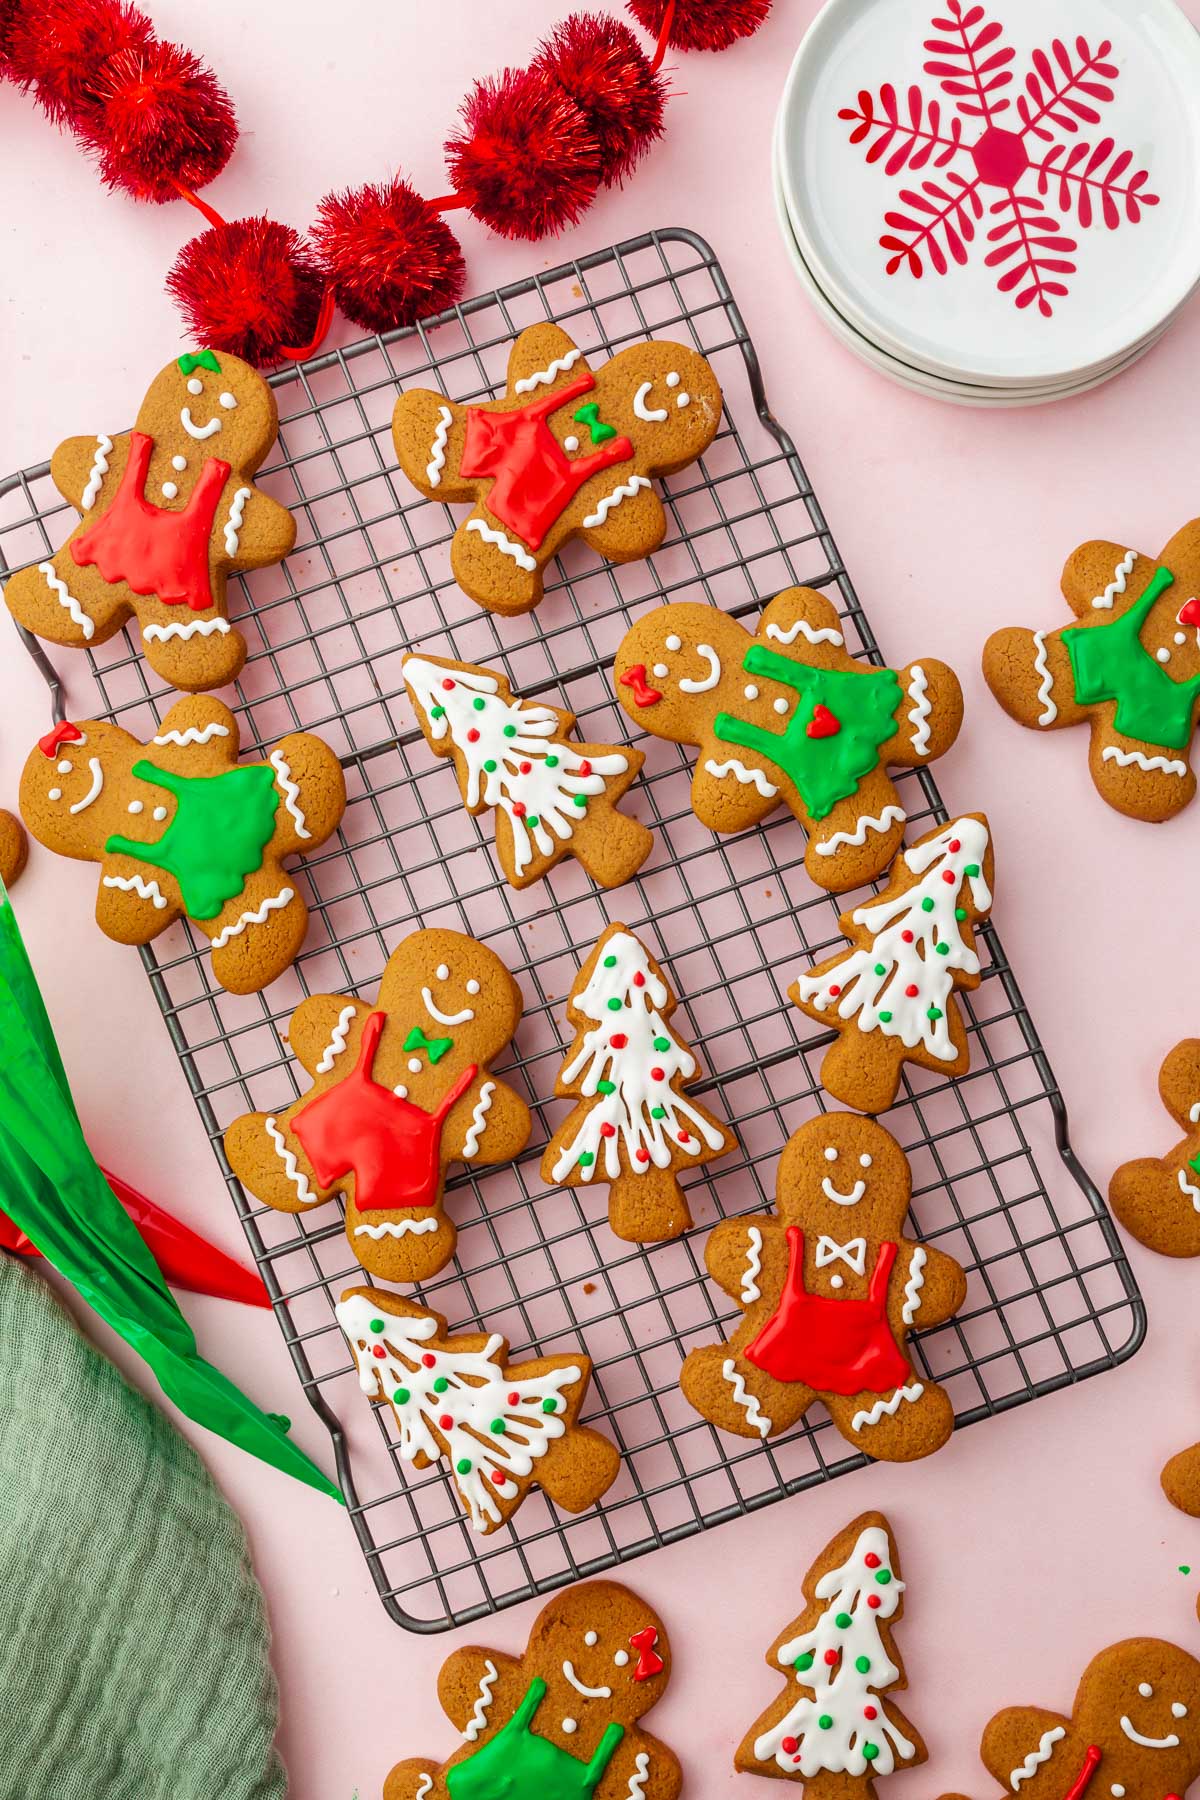 A wire cooling rack with decorated gingerbread cookies that look like Christmas trees and gingerbread men with red, white and green royal icing.